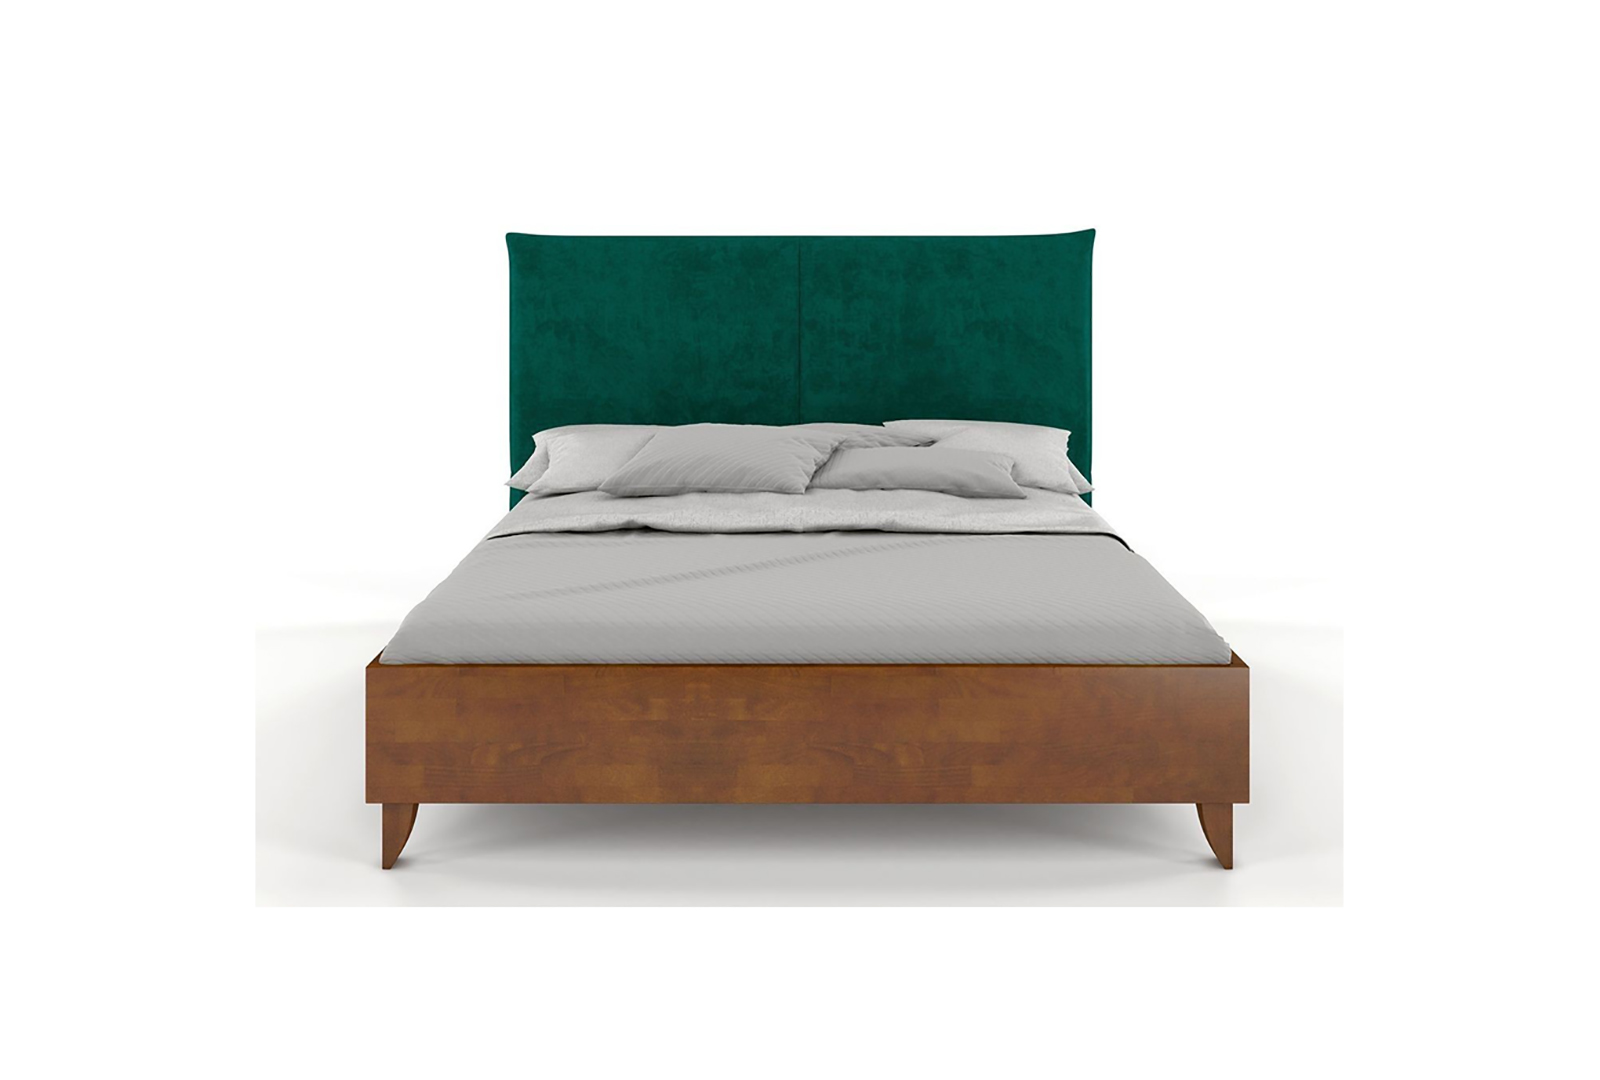 VISBY VIVIEN WOODEN BEECH BED WITH AN UPHOLSTERED HEADBOARD 2